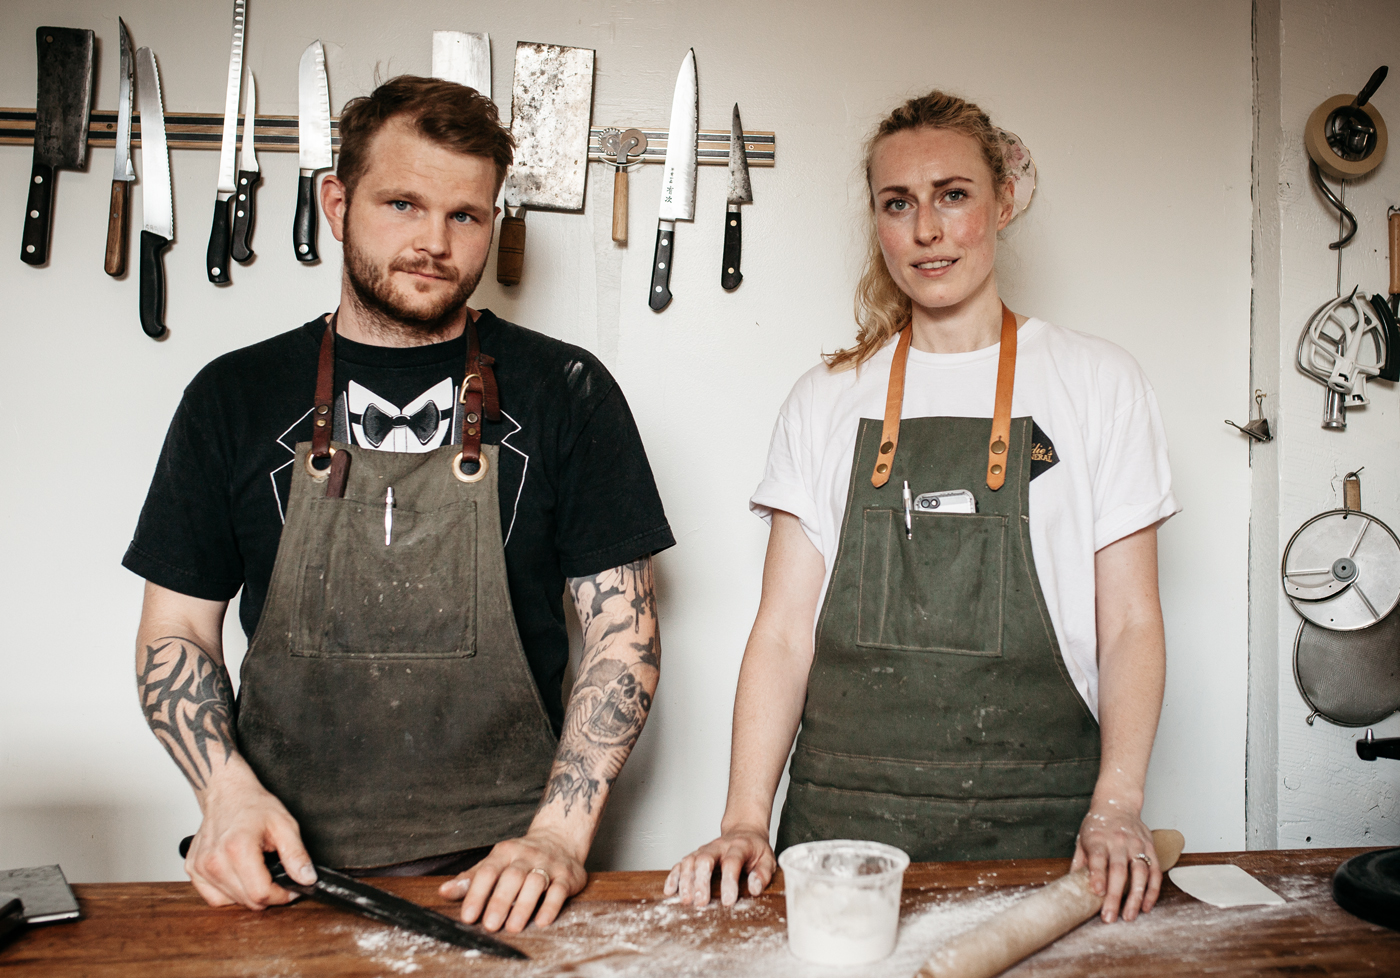 Owners and head chefs at The Hollows and Primal Pasta — Kyle Michael and Christie Peters